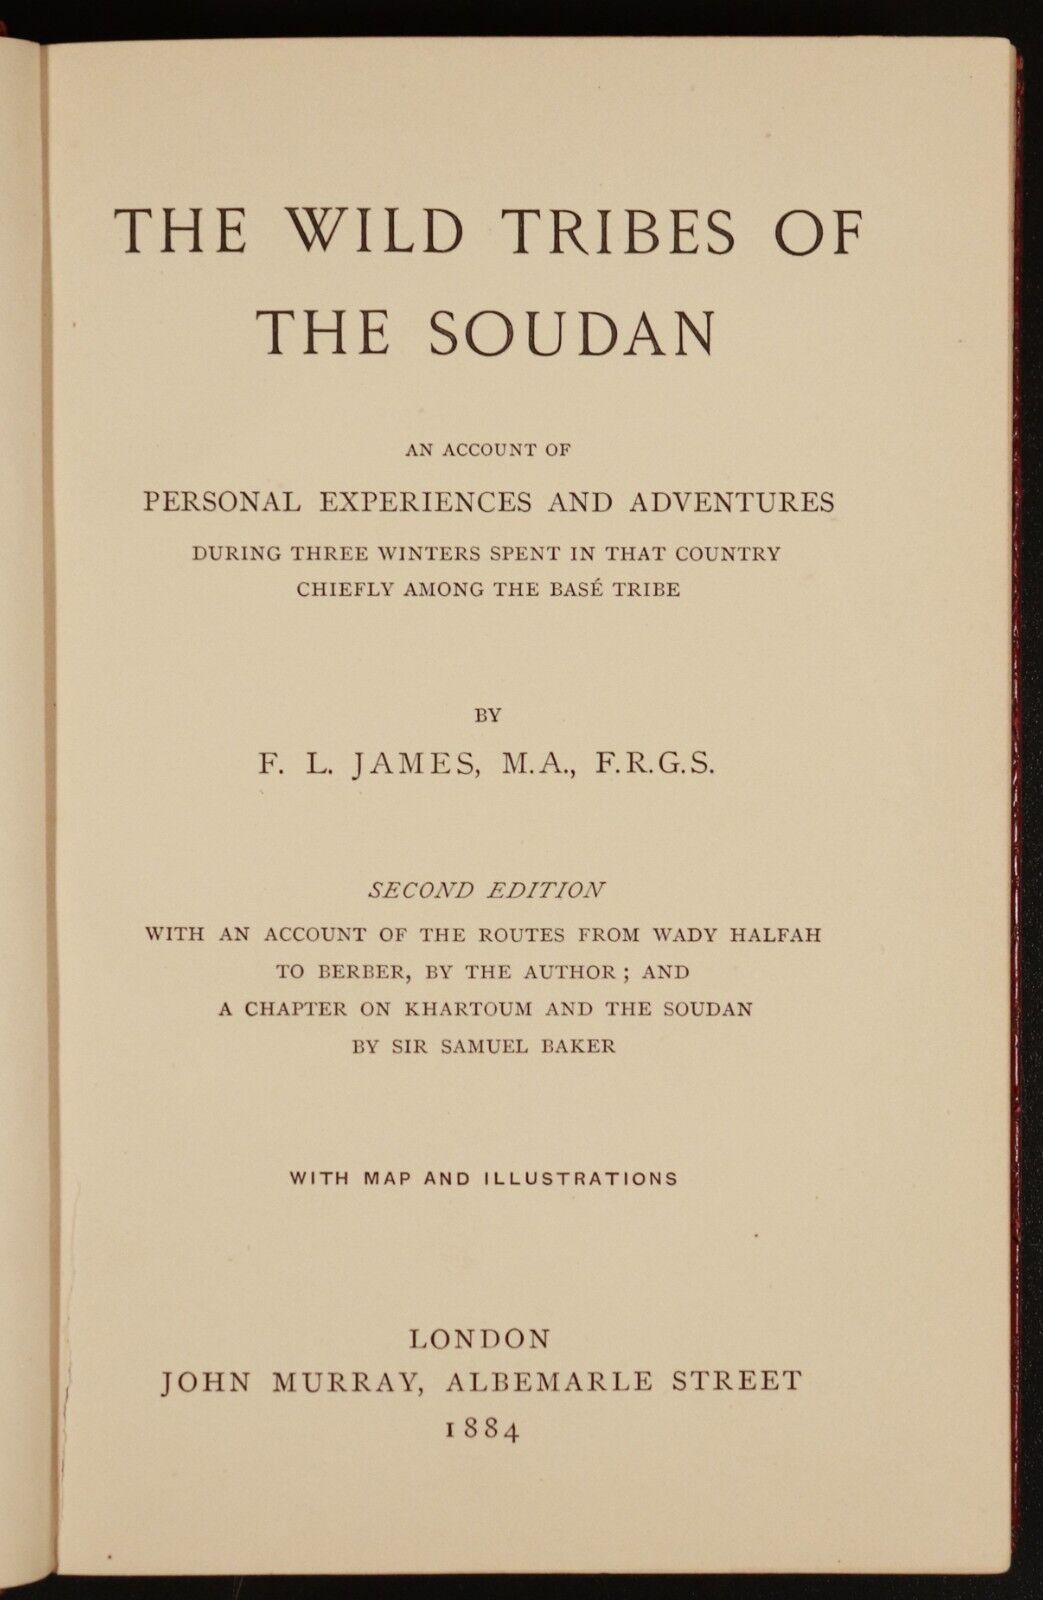 1884 The Wild Tribes Of The Soudan by F.L. James Antiquarian History Book - 0